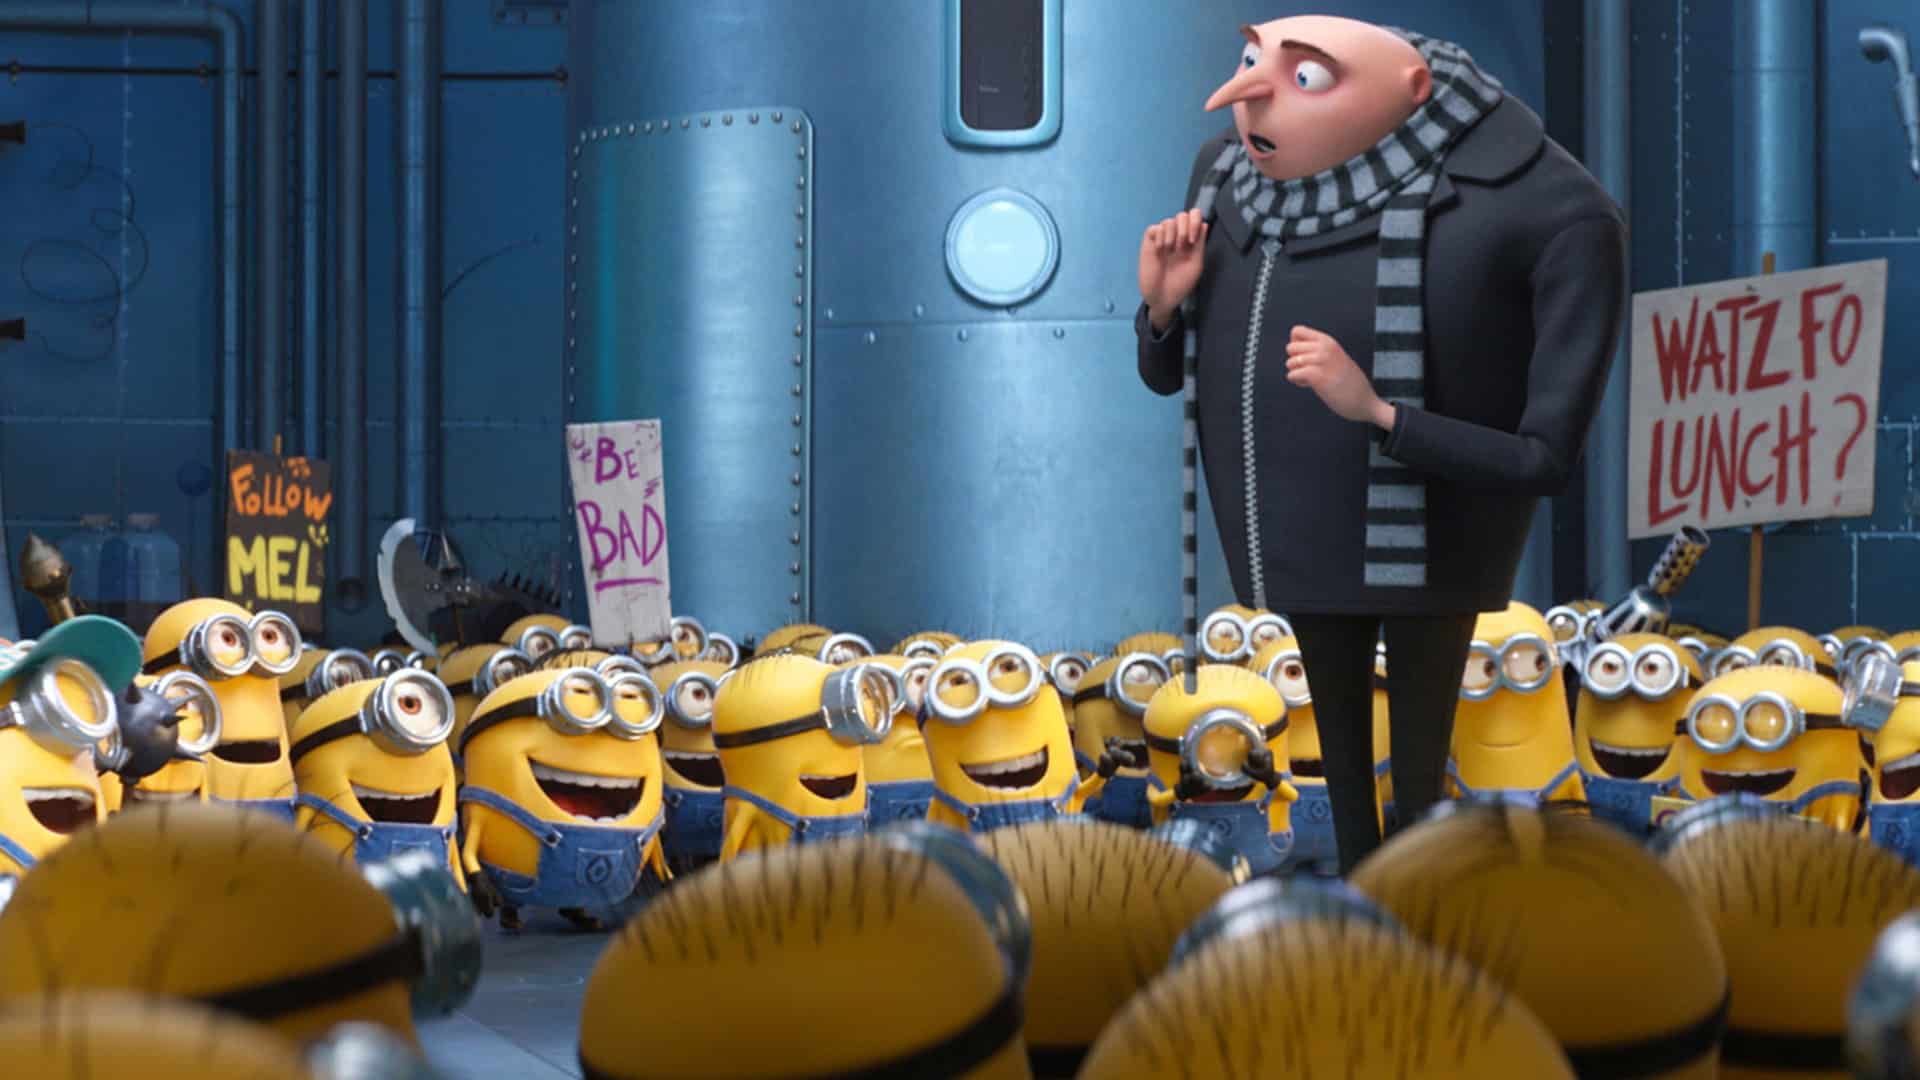 Gru surrounded by Minions in Illumination's Despicable Me 3.